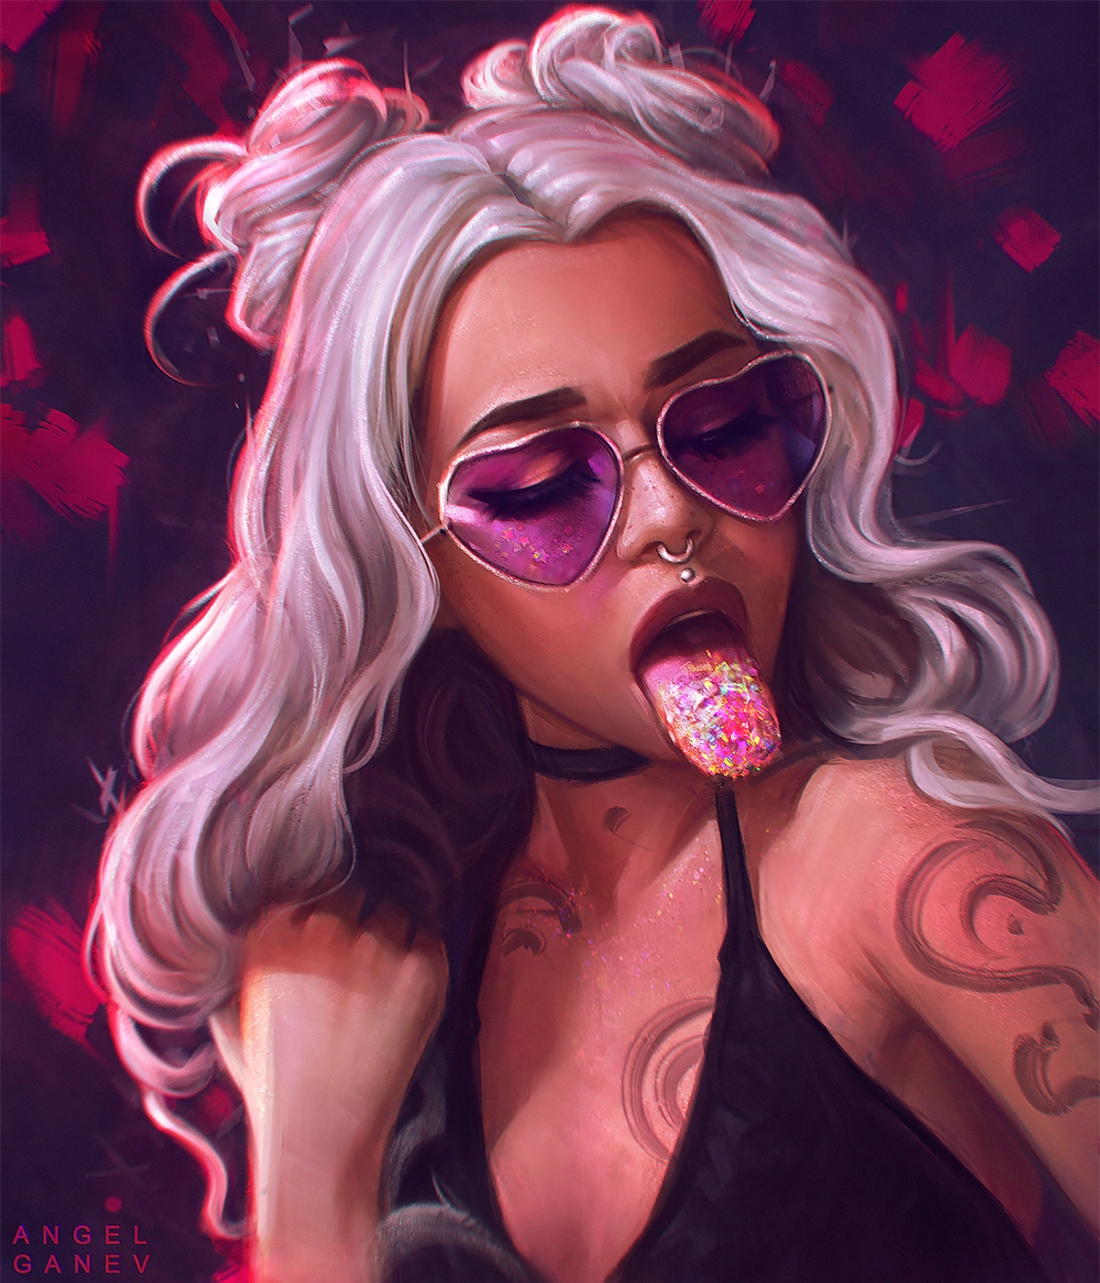 Wallpaper, white hair, long hair, pierced septum, open mouth, tongues, tongue out, necklace, bare shoulders, black tops, cleavage, face, portrait, women with shades, artwork, digital painting, illustration, drawing, digital art, Angel